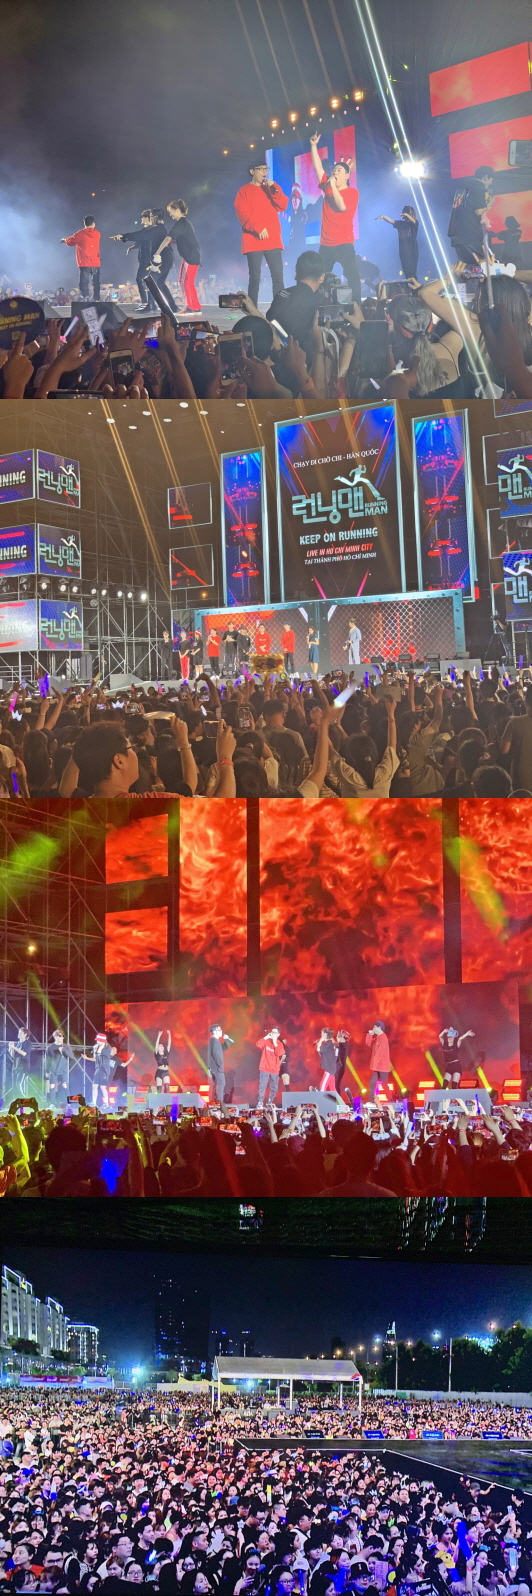 More than 10,000 Vietnamese fans gathered for Running Man.About 10,000 fans gathered to demonstrate the global popularity of Running Man at the Running Man fan meeting held in Ho Chi Minh, Vietnam on the 1st.The fan meeting performance was held in the Ho Chi Minh outdoor performance hall with a full-seat stand, with the first 10,000 spectators in Southeast Asia gathering and the record of 9,000 tickets being sold on the first day of ticket opening.In addition, 5,000 people watched the performance on the official YouTube live channel of Archer Media, the official partner of SBSs Running Man fan meeting Event, at the same time as the performance began.The performance MC appeared in Vietnams Running Man this year, adding meaning to the role of actor and singer Nguyen Hui, who has recently gained great popularity.The Event lasted about 2 hours and 30 minutes, and the Running Man members performed a concert despite a hot day to pay back the fans Fly Me to Polaris and cheers, worrying about the fans standing for a long time and watching the performance.We are preparing for the Asia Fan Meeting Tour to mark the 10th anniversary of Running Man next year, and the Fly Me to Polaris from Vietnamese fans has been a great help, said Yoo Won-ri, a producer at SBS Global Contents Biz Team.The 2019 Running Man Overseas Fan Meeting Tour will end Ho Chi Minh for the last time after Hong Kong and Jakarta, he said.Meanwhile, Running Man is expected to continue its global popularity as it will prepare for the launch of Vietnam Running Man Season 2 based on its popularity in Vietnam.